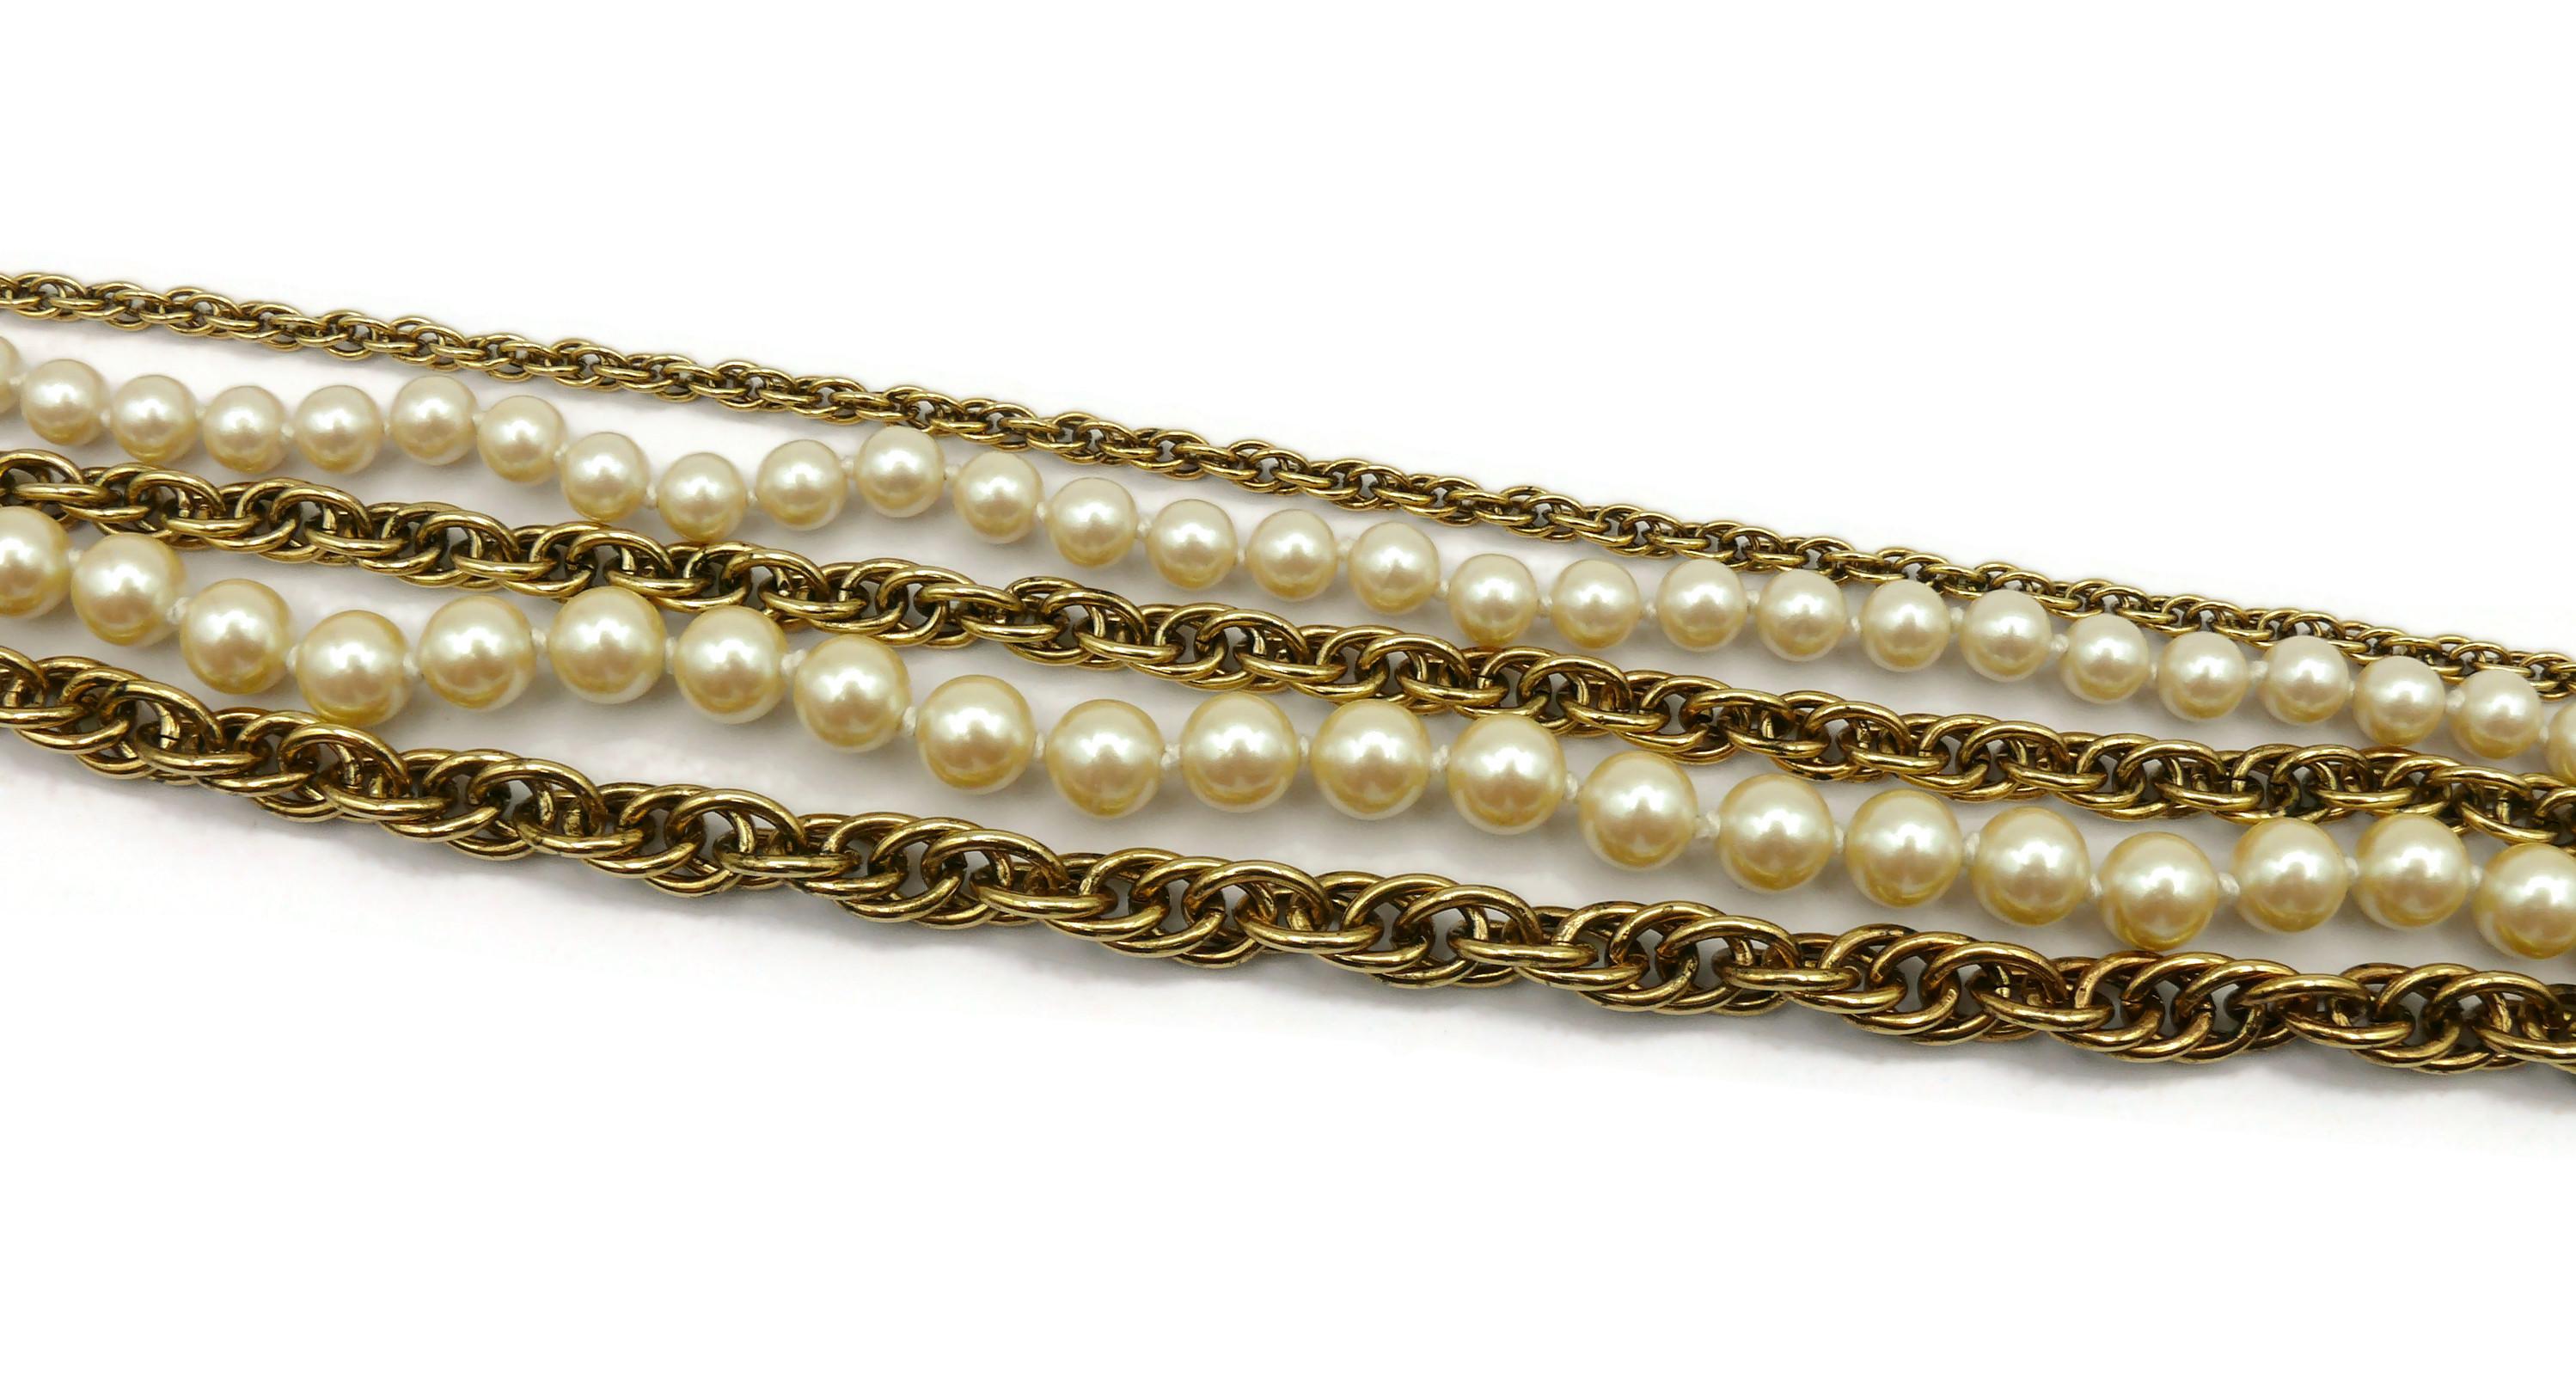 Women's MOSCHINO Vintage Multi-Strand Gold Tone Chain & Pearl Necklace For Sale